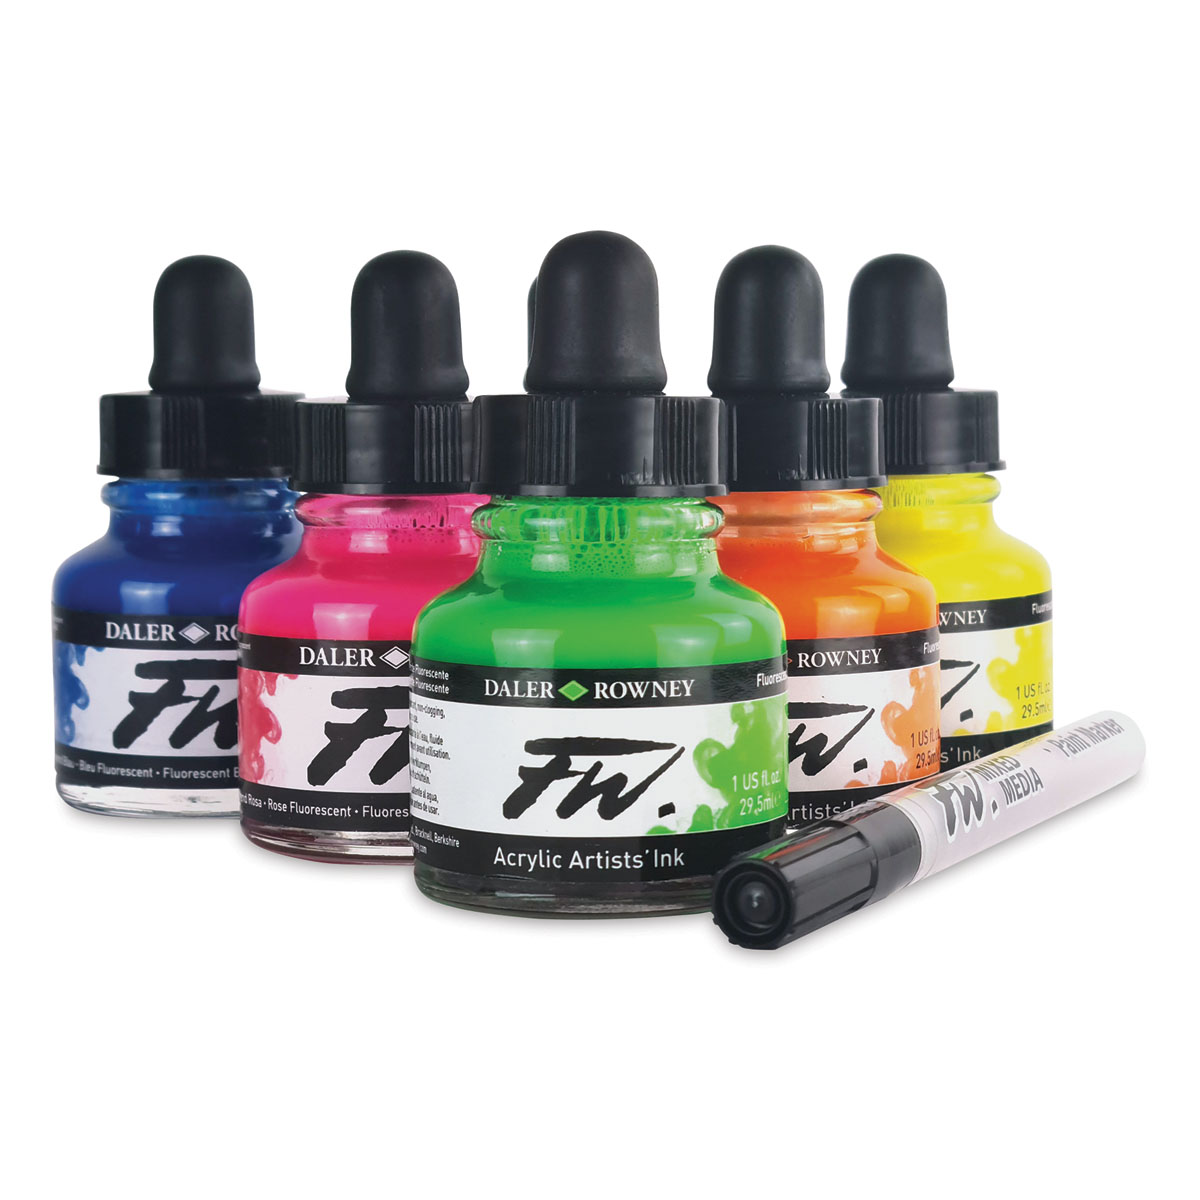 Allards Art - Daler-Rowney FW Acrylic Inks are acrylic based, pigmented,  water-resistant artists' inks with a high degree of lightfastness and  intermixability. FW Acrylic Ink can be used straight out of the